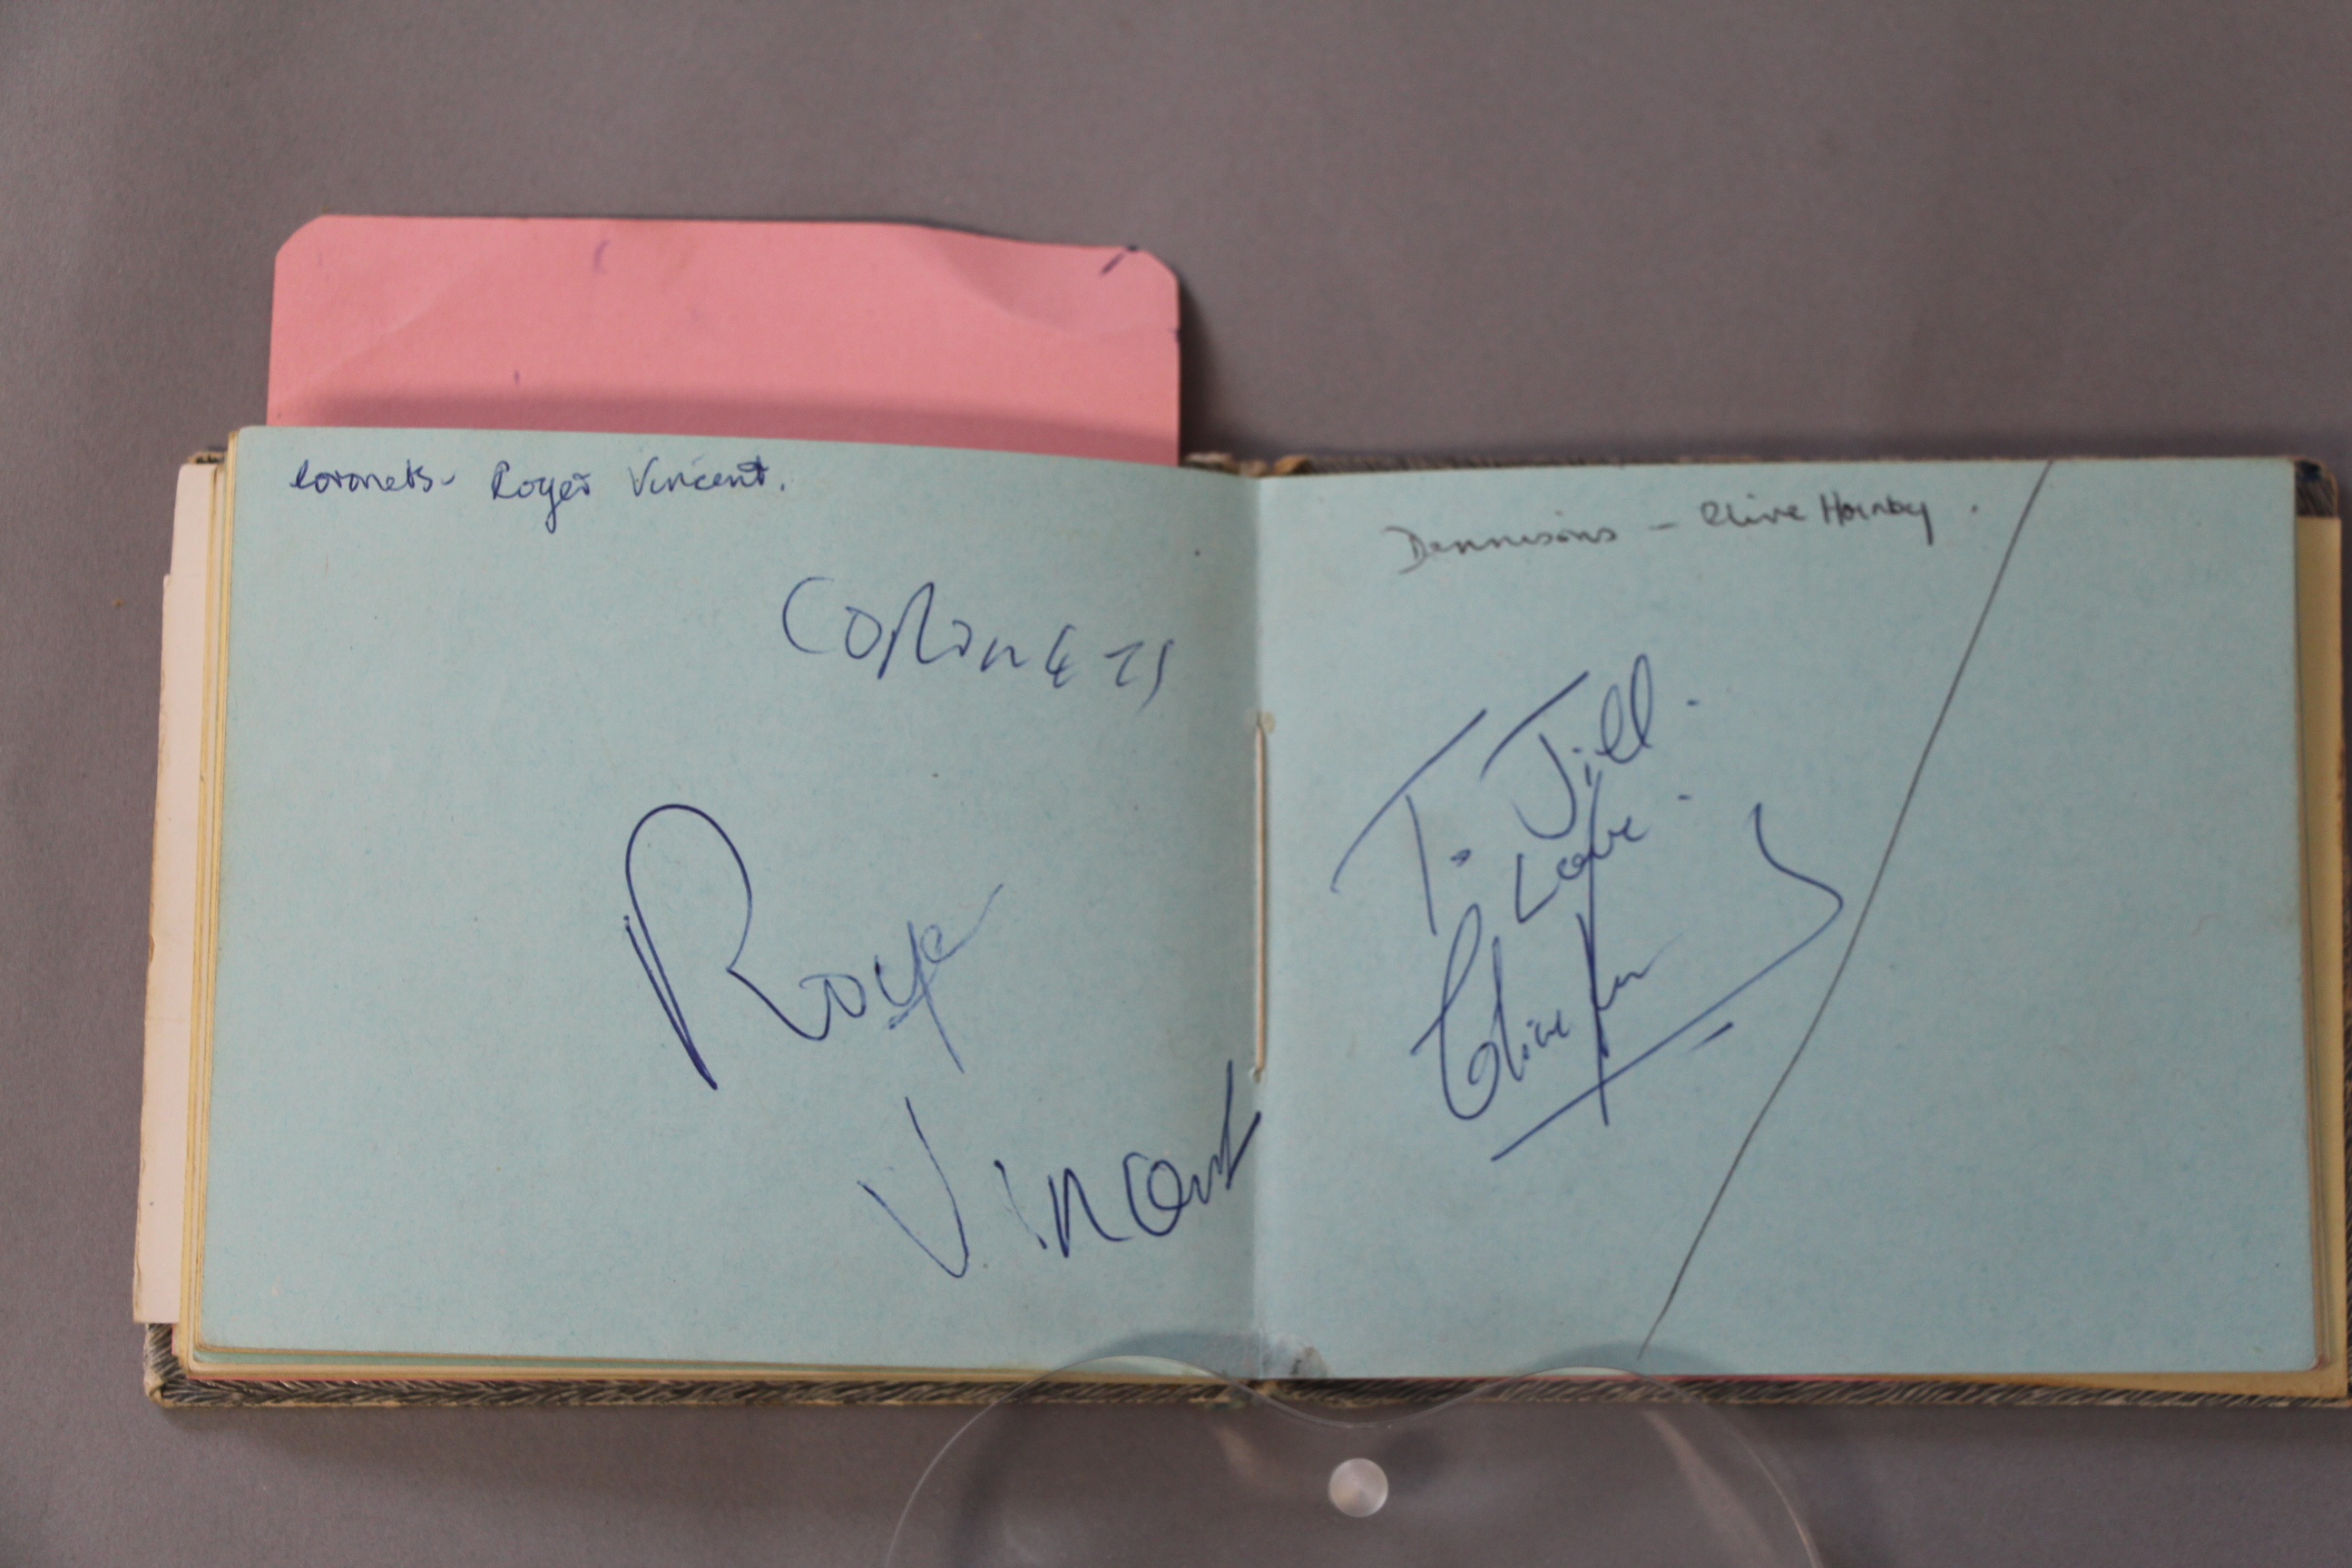 An autograph book with signatures and many car registrations of the groups collected personally by - Image 15 of 22